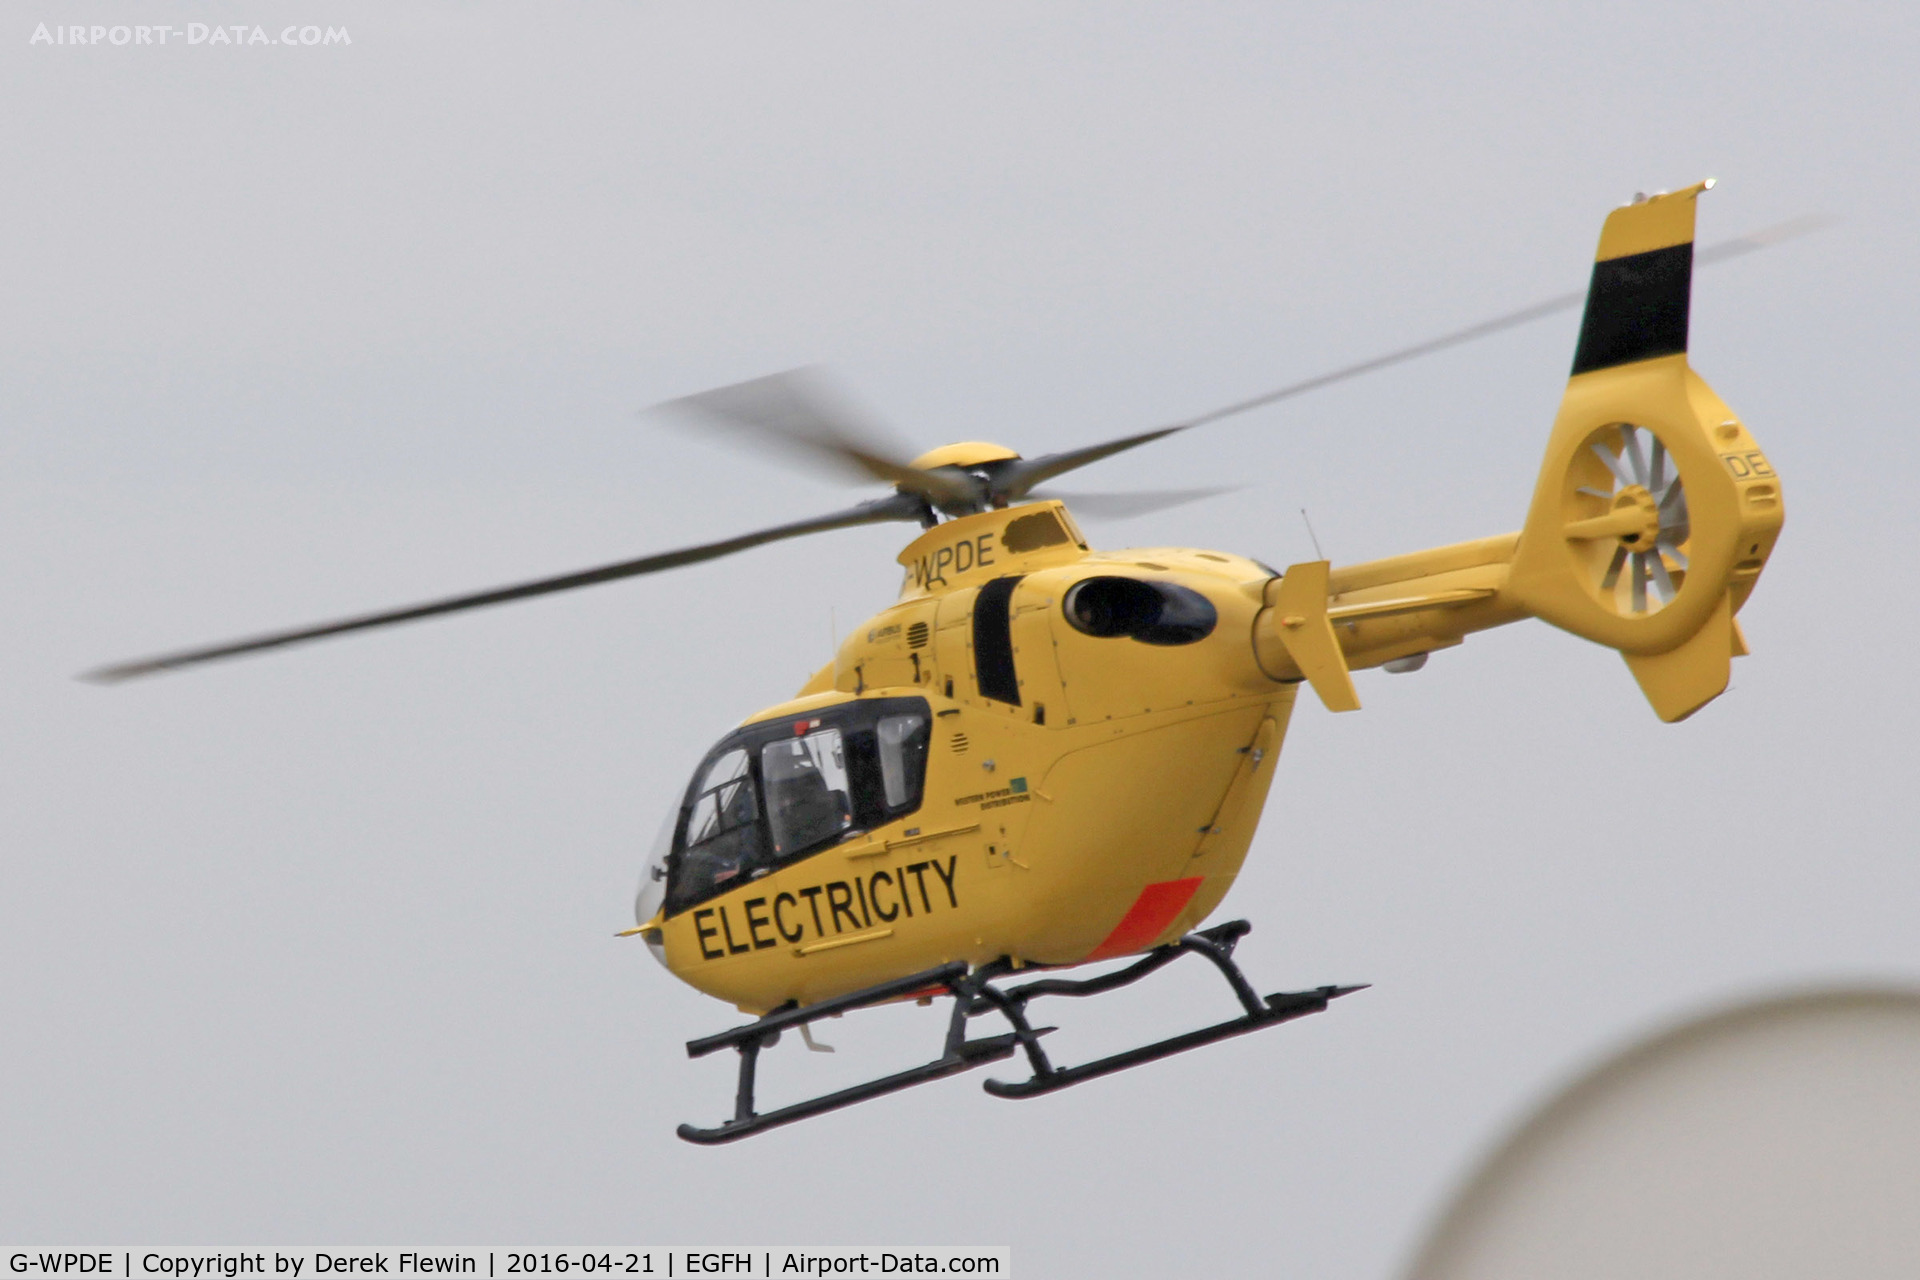 G-WPDE, 2015 Airbus Helicopters EC-135P-2+ C/N 1145, EC-135P-2+, WPD Helicopter Unit Bristol Lulsgate based, previously D-HECP, seen lifting on task to the Cardiff area 